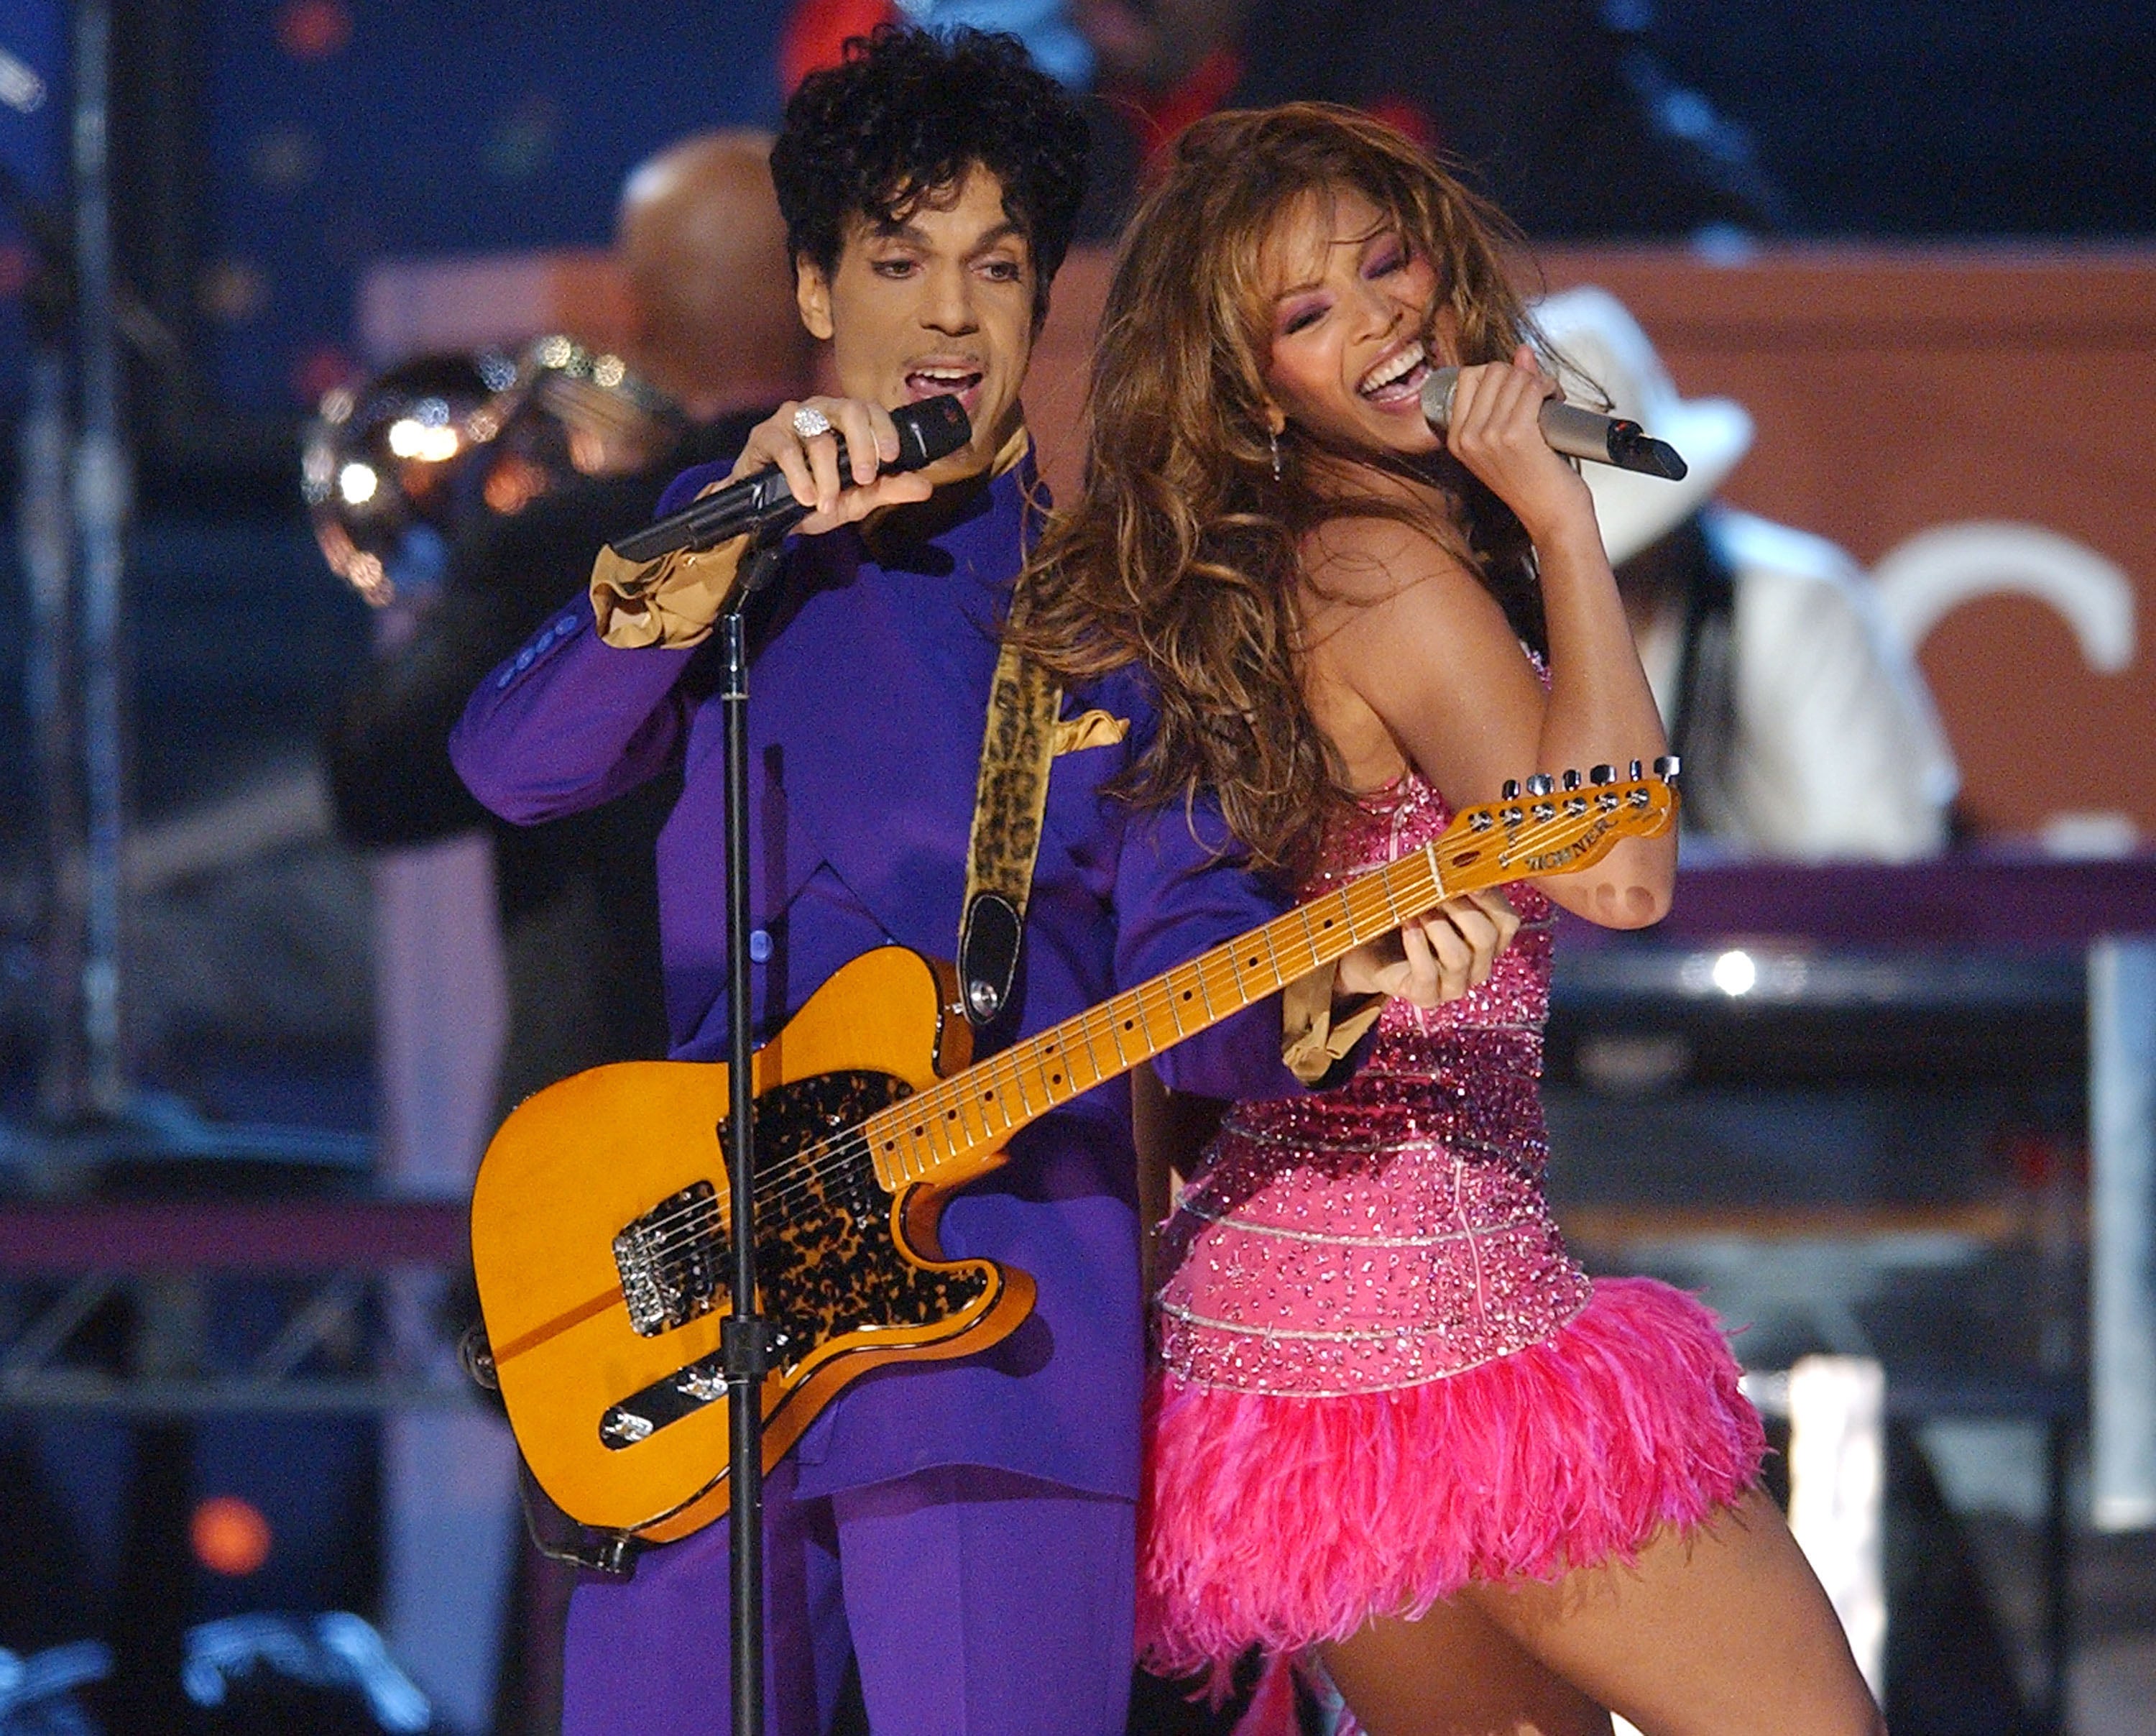 Watch Beyoncé Pay Tribute to Prince with a Cover of ‘The Beautiful Ones’
